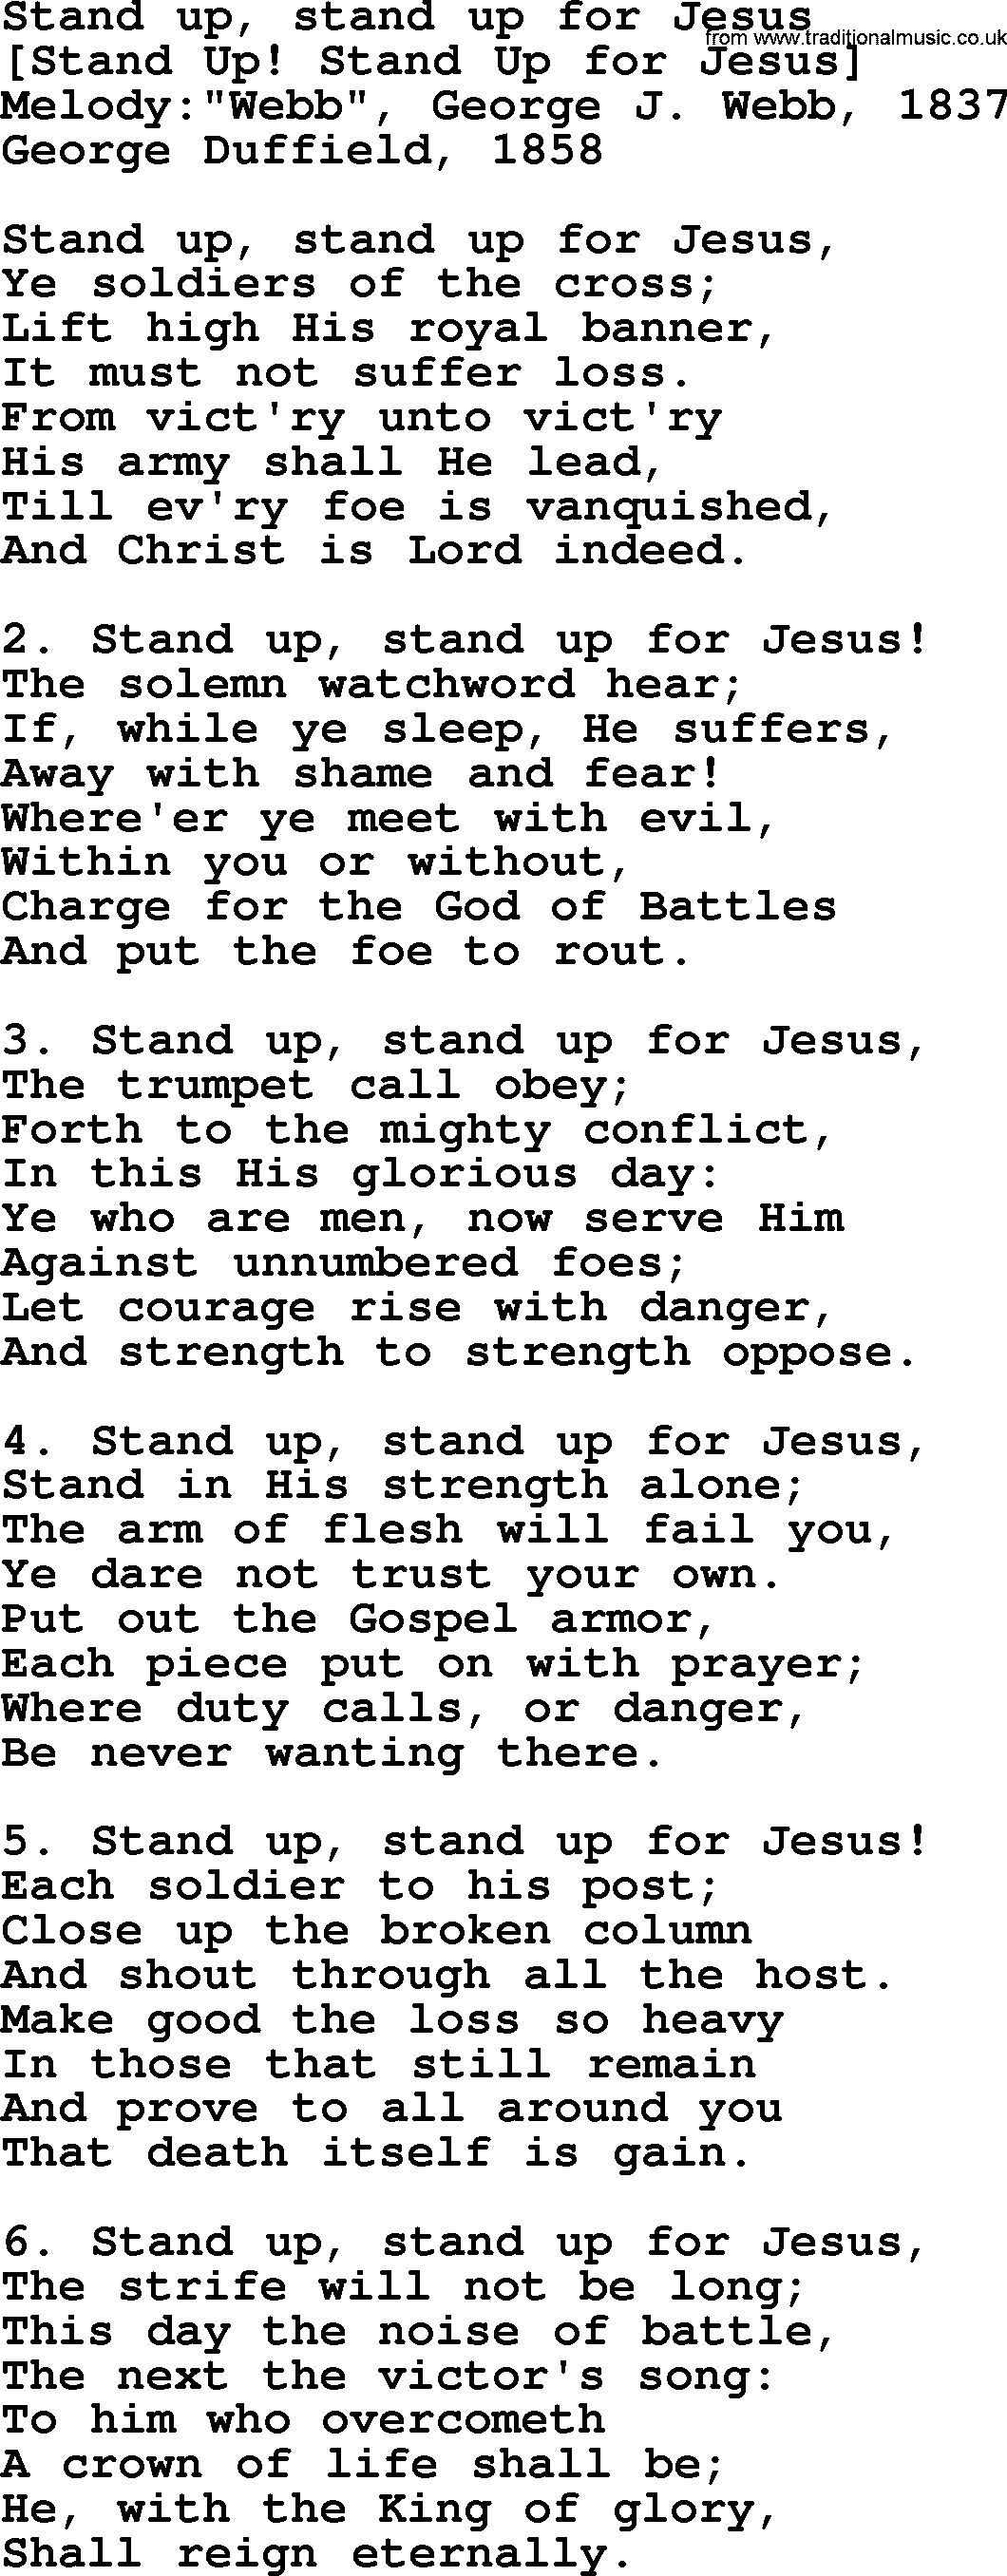 Old American Song: Stand Up, Stand Up For Jesus, lyrics